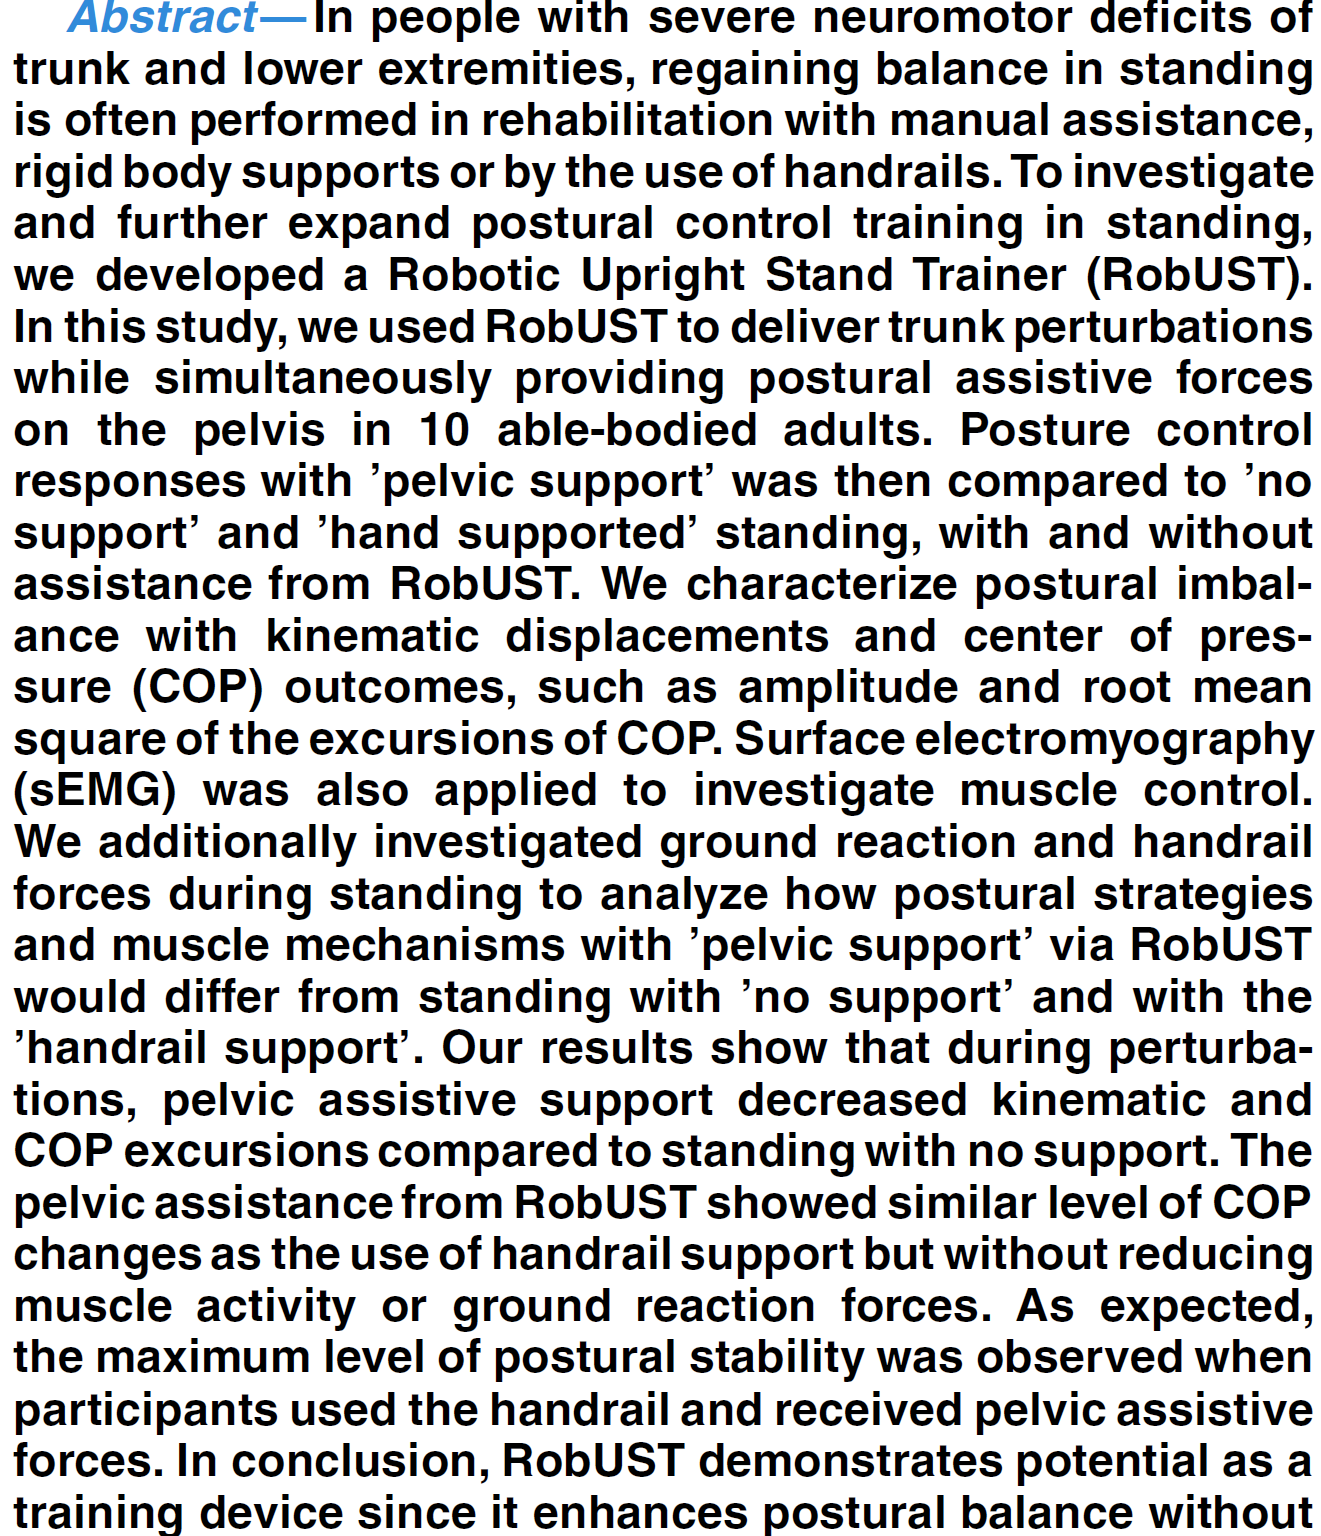 RobUST enhances subject's ability in postural control 